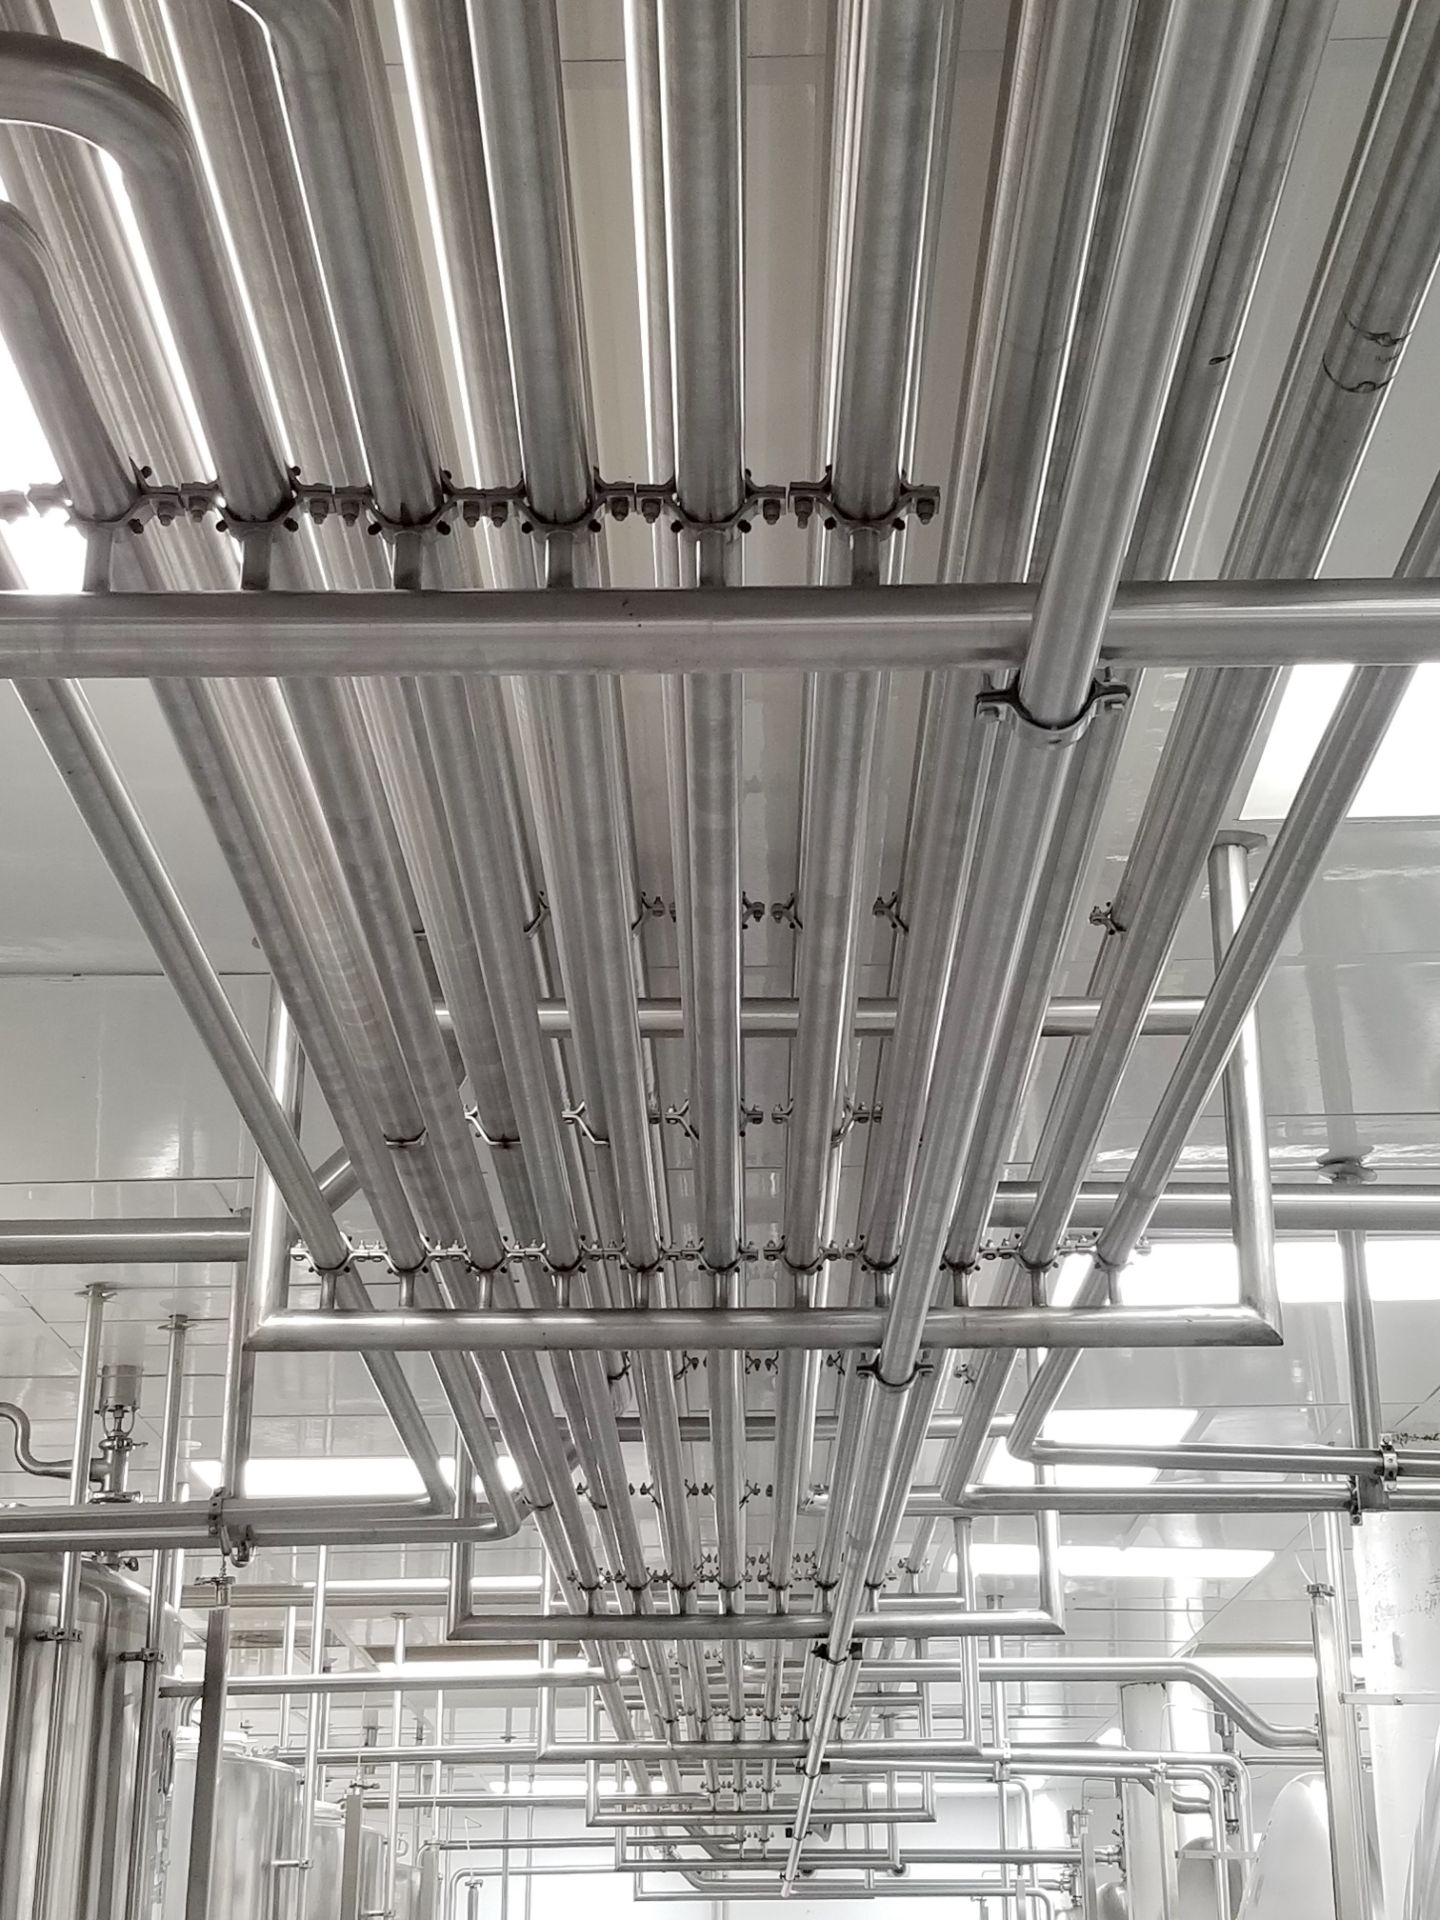 Stainless Steel 2 Inch Piping - Image 2 of 2